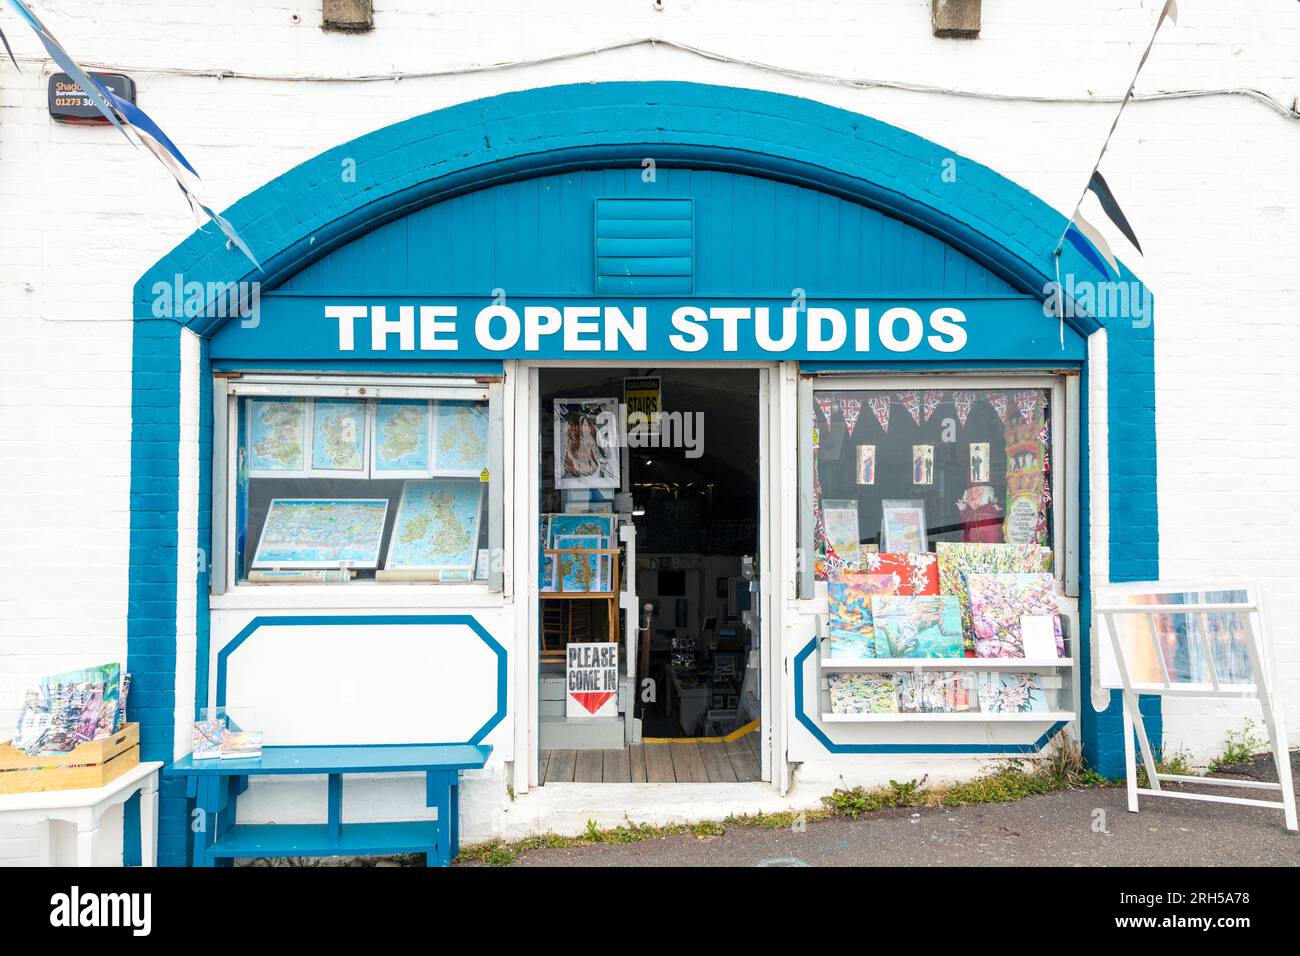 The Open Studios - artist studios in Kings Road Arches at the seafront, Brighton, East Sussex, England Stock Photo